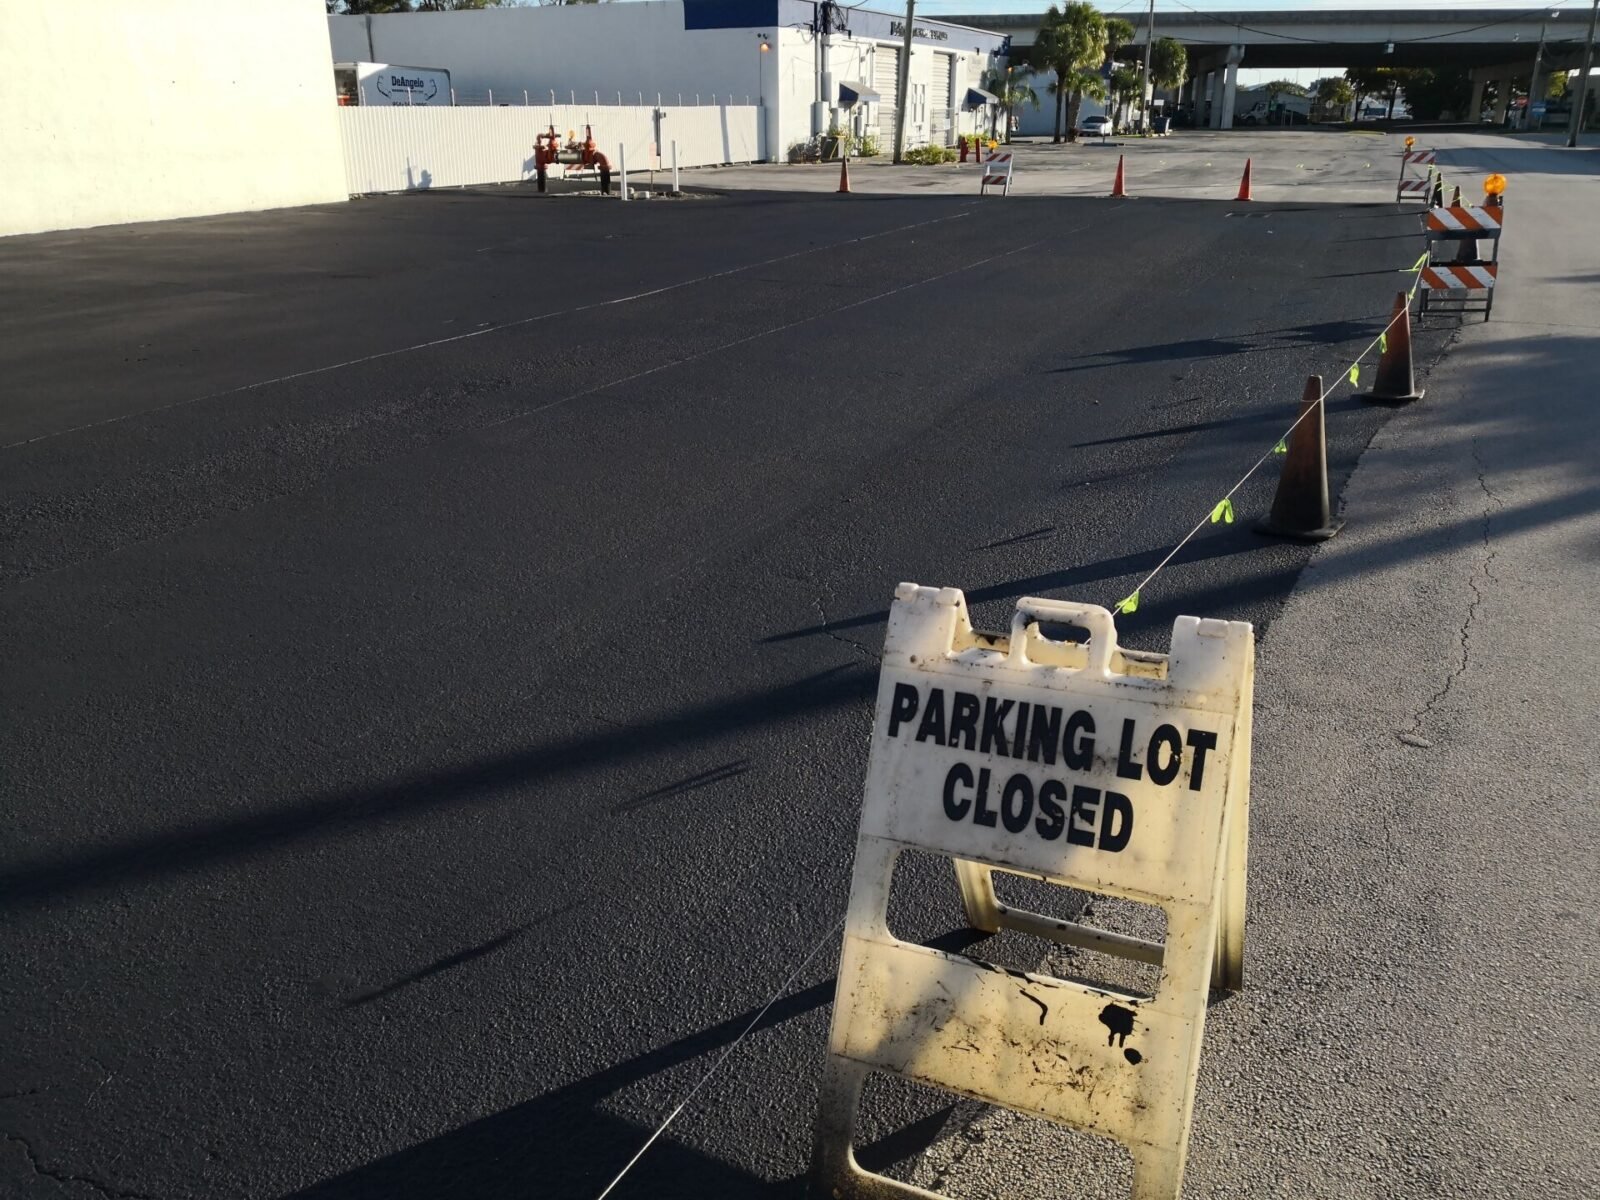 Parking Lot Closed in the foreground of an image showing an empty, freshly paved parking lot by Palm Beach Asphalt. Traffic cones and a barricade are visible, blocking off the area. There's a building and some trees in the background under a clear Boynton Beach FL sky.